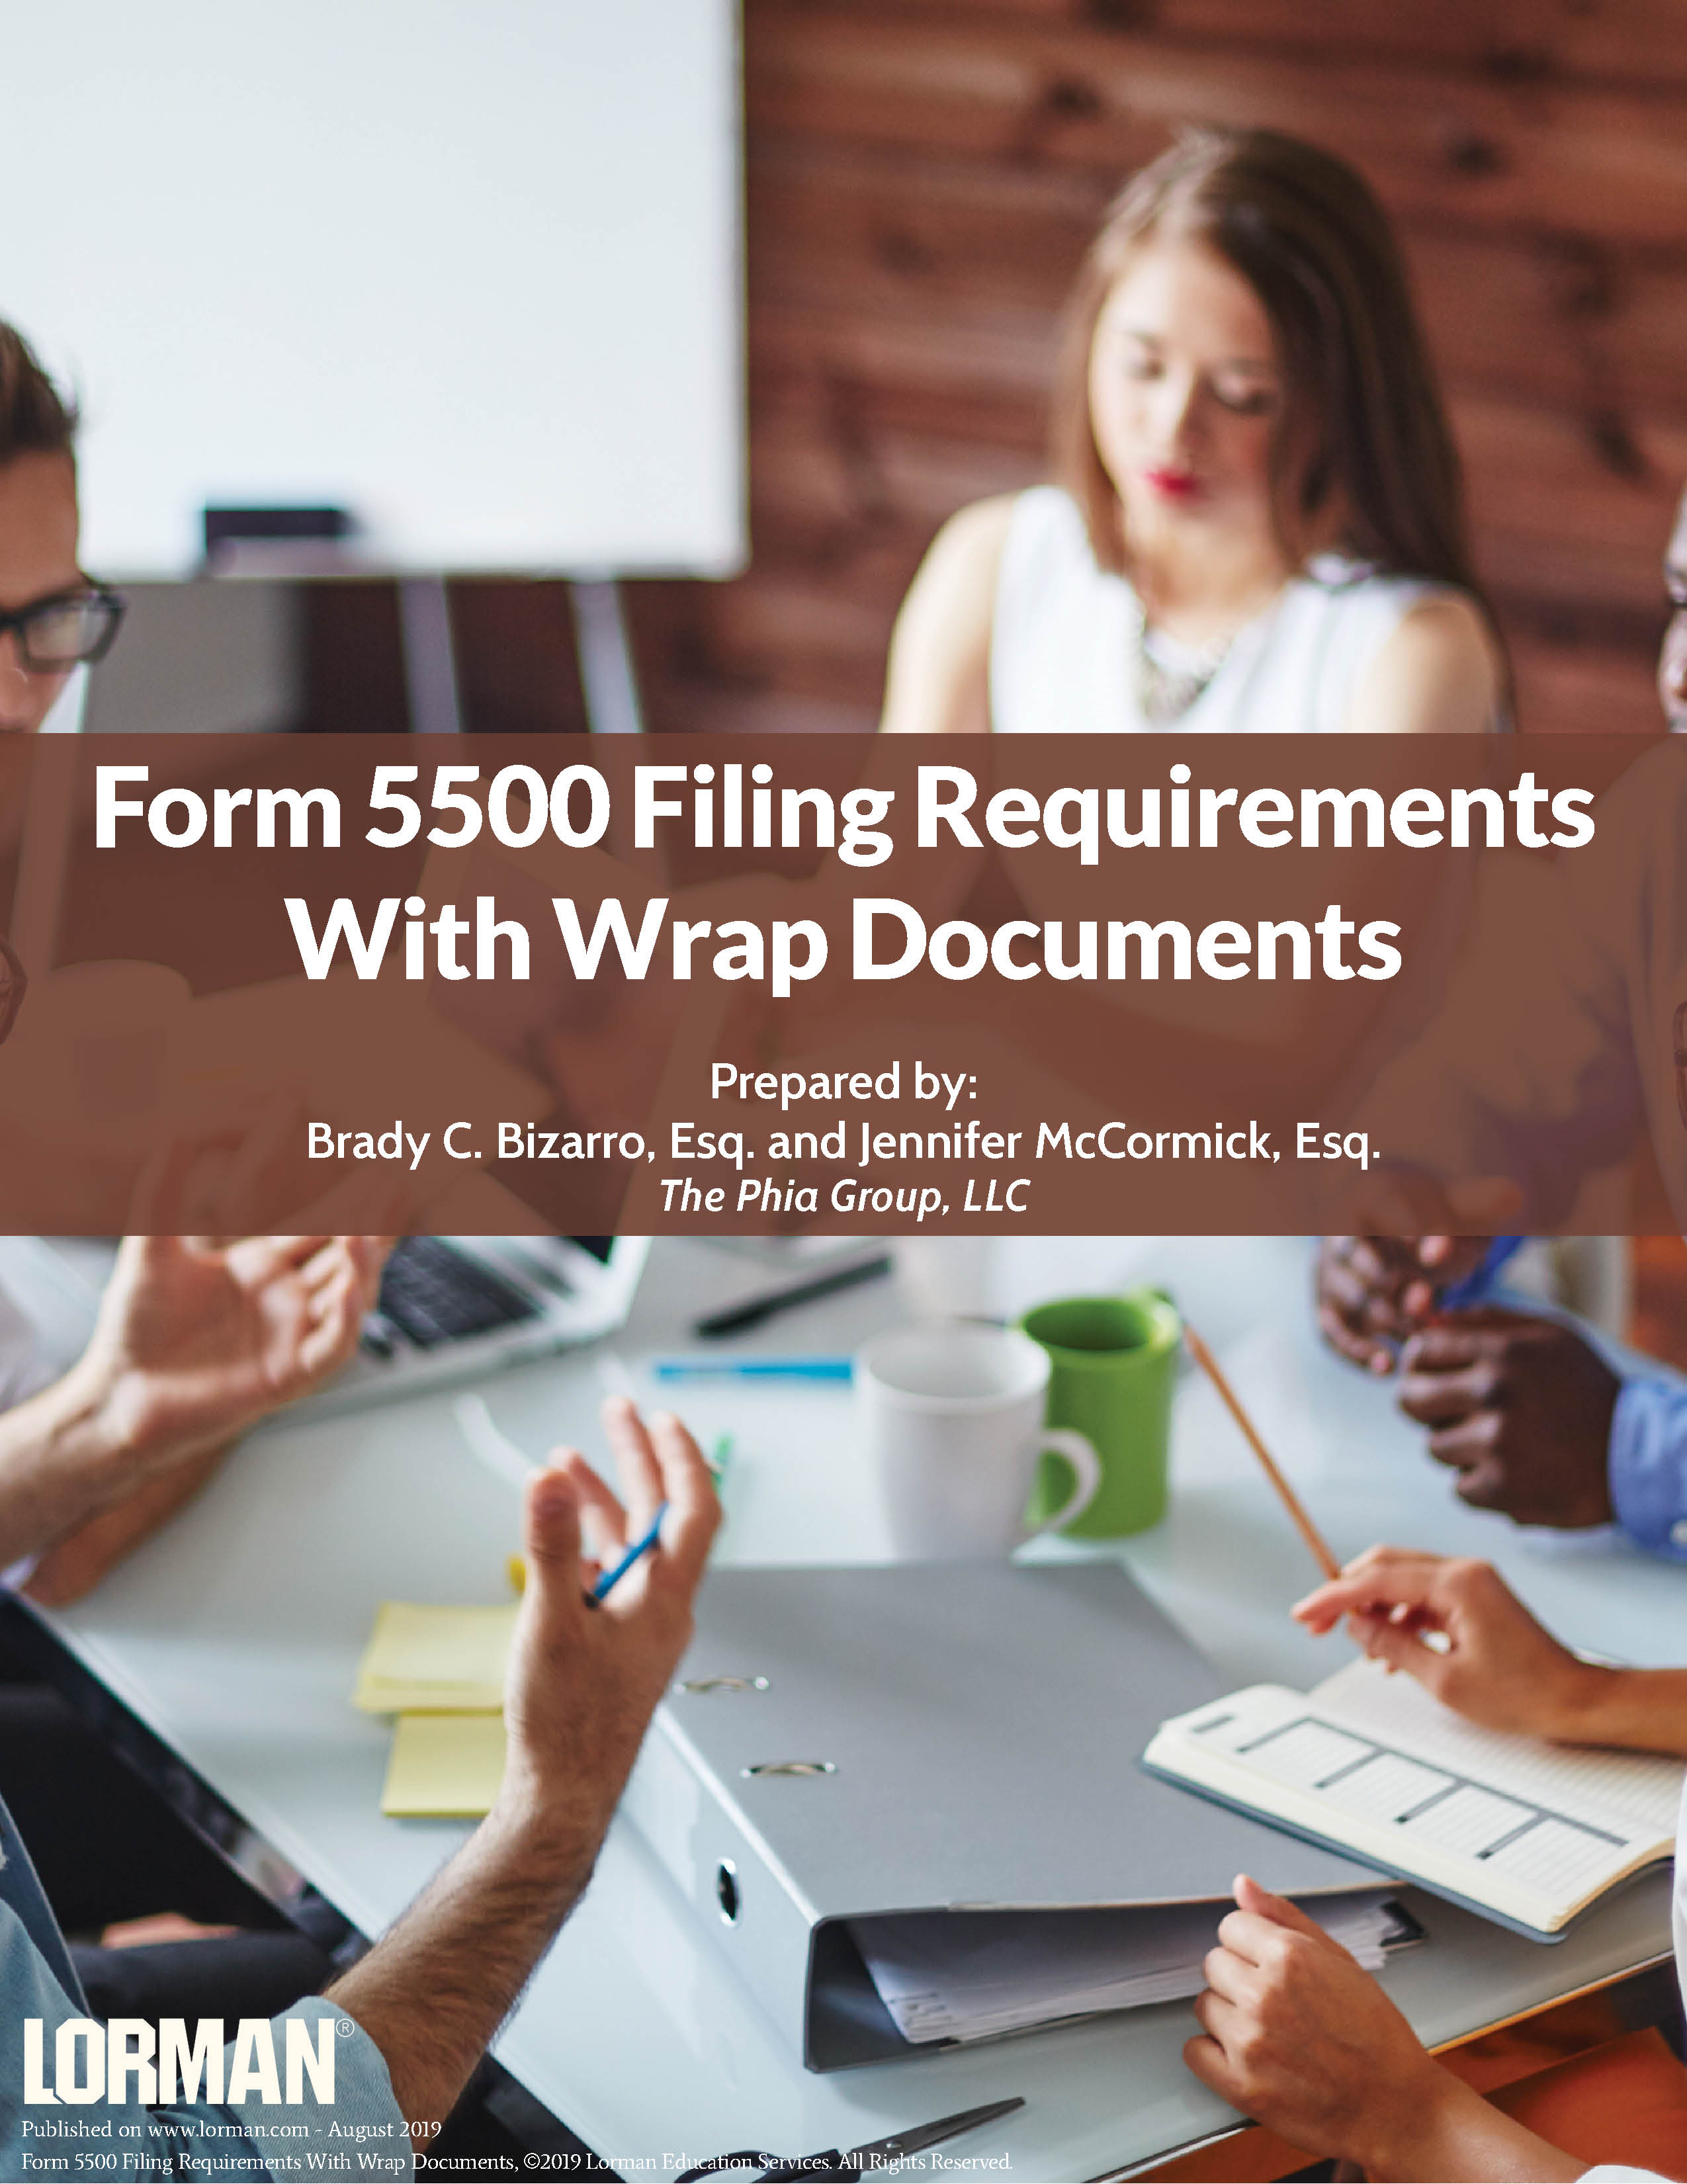 Form 5500: Filing Requirements with Wrap Documents